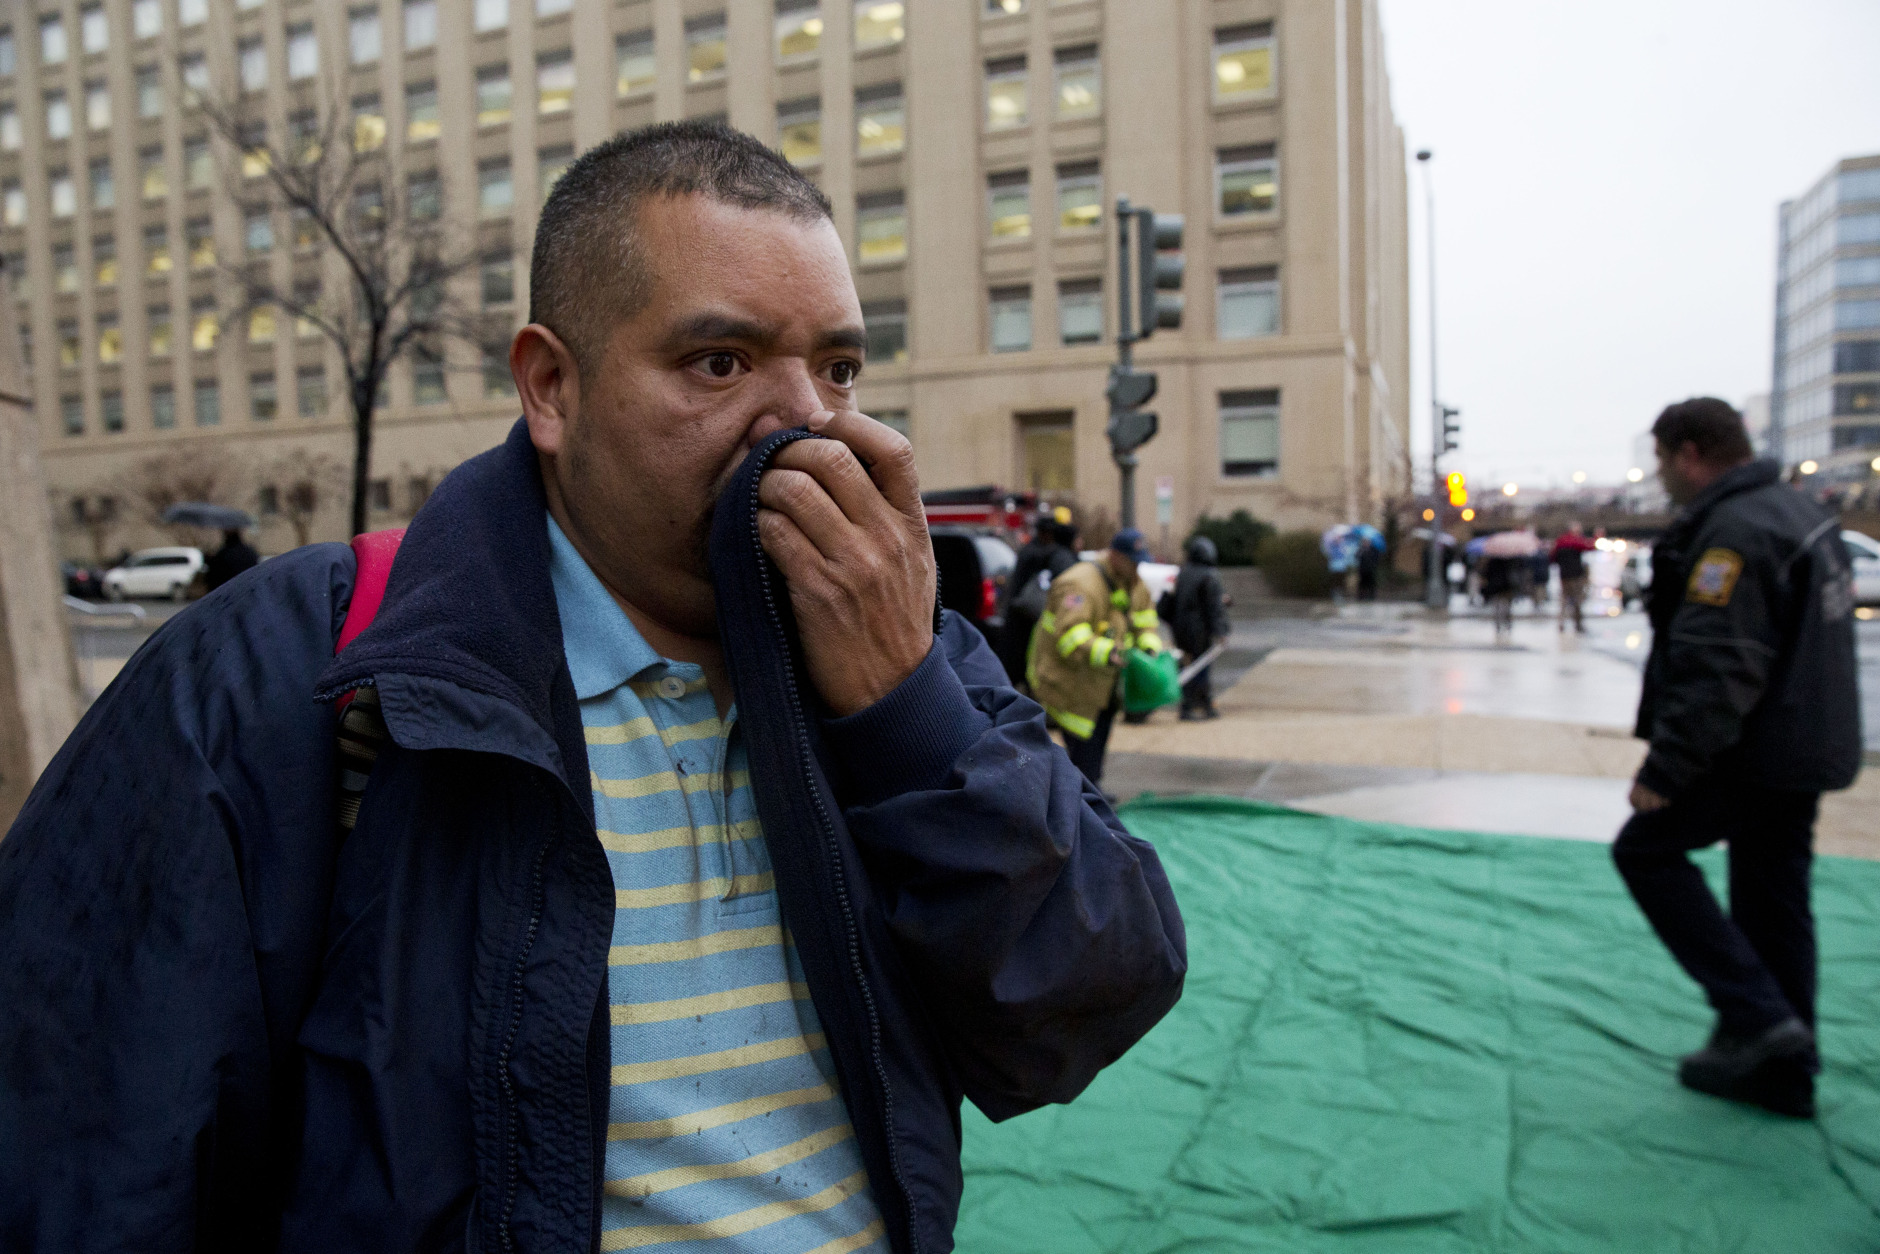 Reynaldo Hernandez holds a cloth over his smoke covered face as he coughs deeply after being evacuated from a smoke filled metro subway tunnel in Washington, Monday, Jan. 12, 2015.   Metro officials say one of the busiest stations in downtown Washington has been evacuated because of smoke.  Authorities say the source of the smoke is unknown.  (AP Photo/Jacquelyn Martin)